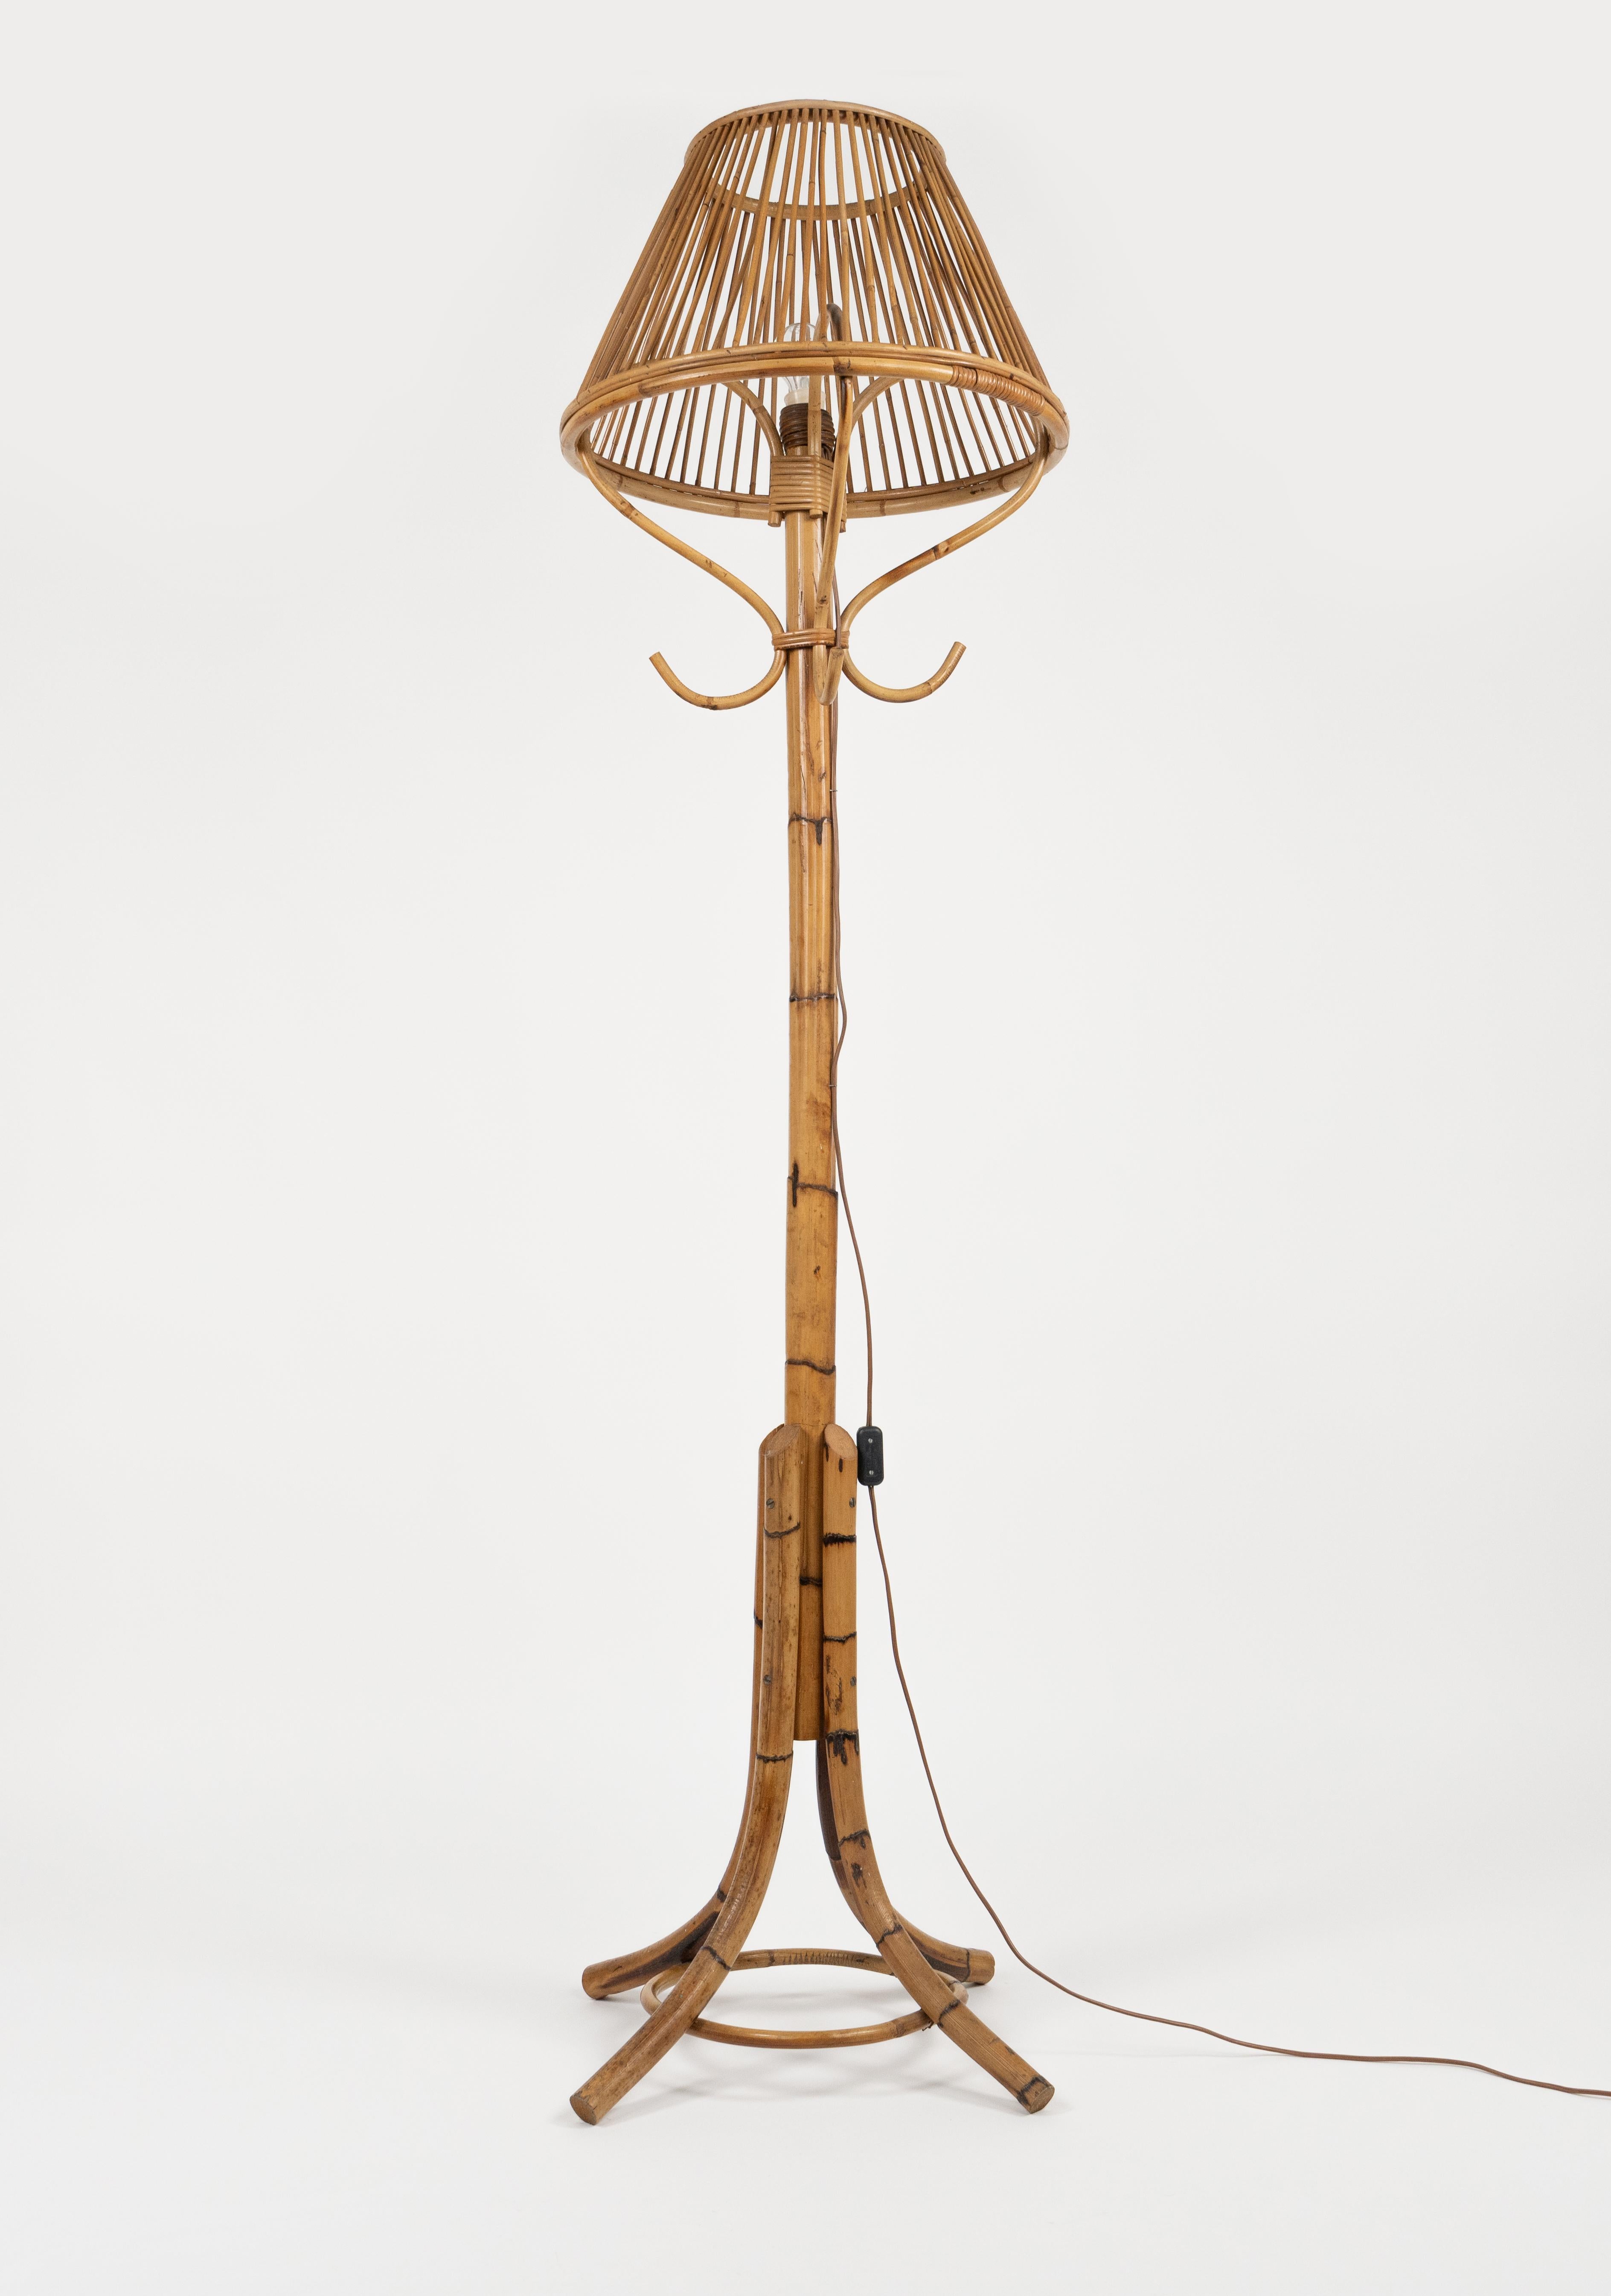 Midcentury Bamboo and Rattan Floor Lamp Franco Albini Style, Italy 1960s For Sale 1